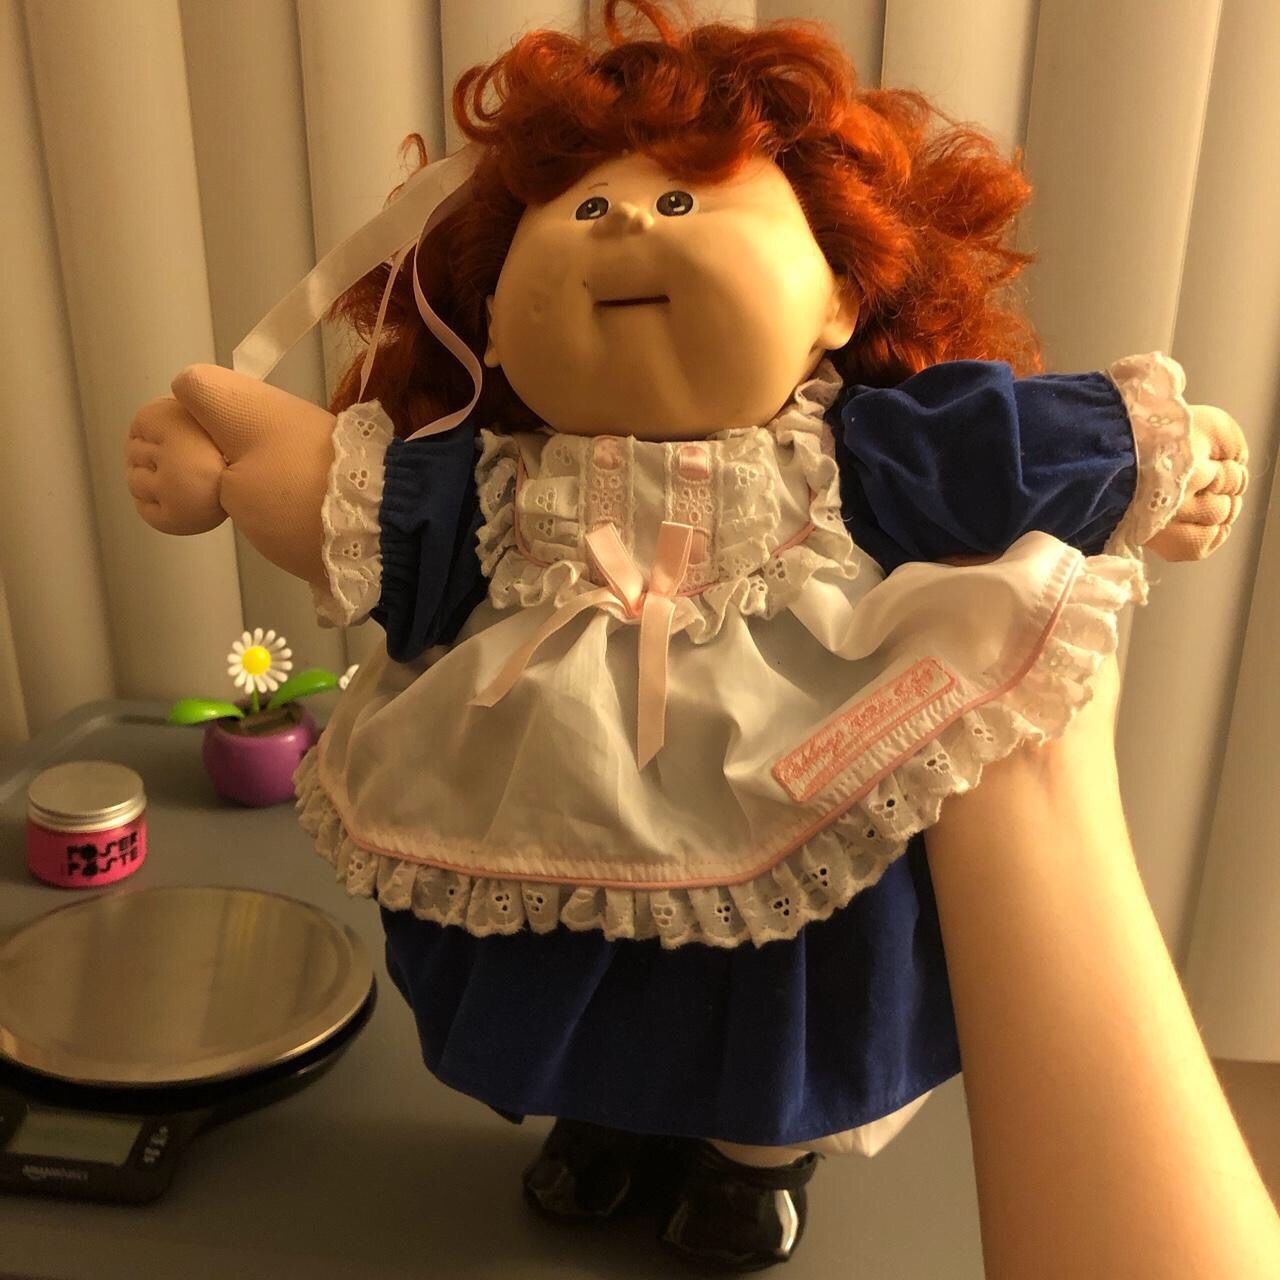 Vintage Cabbage Patch Kids Talking Doll Soft Red Curly Hair VINTAGE RARE collectable SHE TALKS WITH BATTERIES Blue and white velvet dress